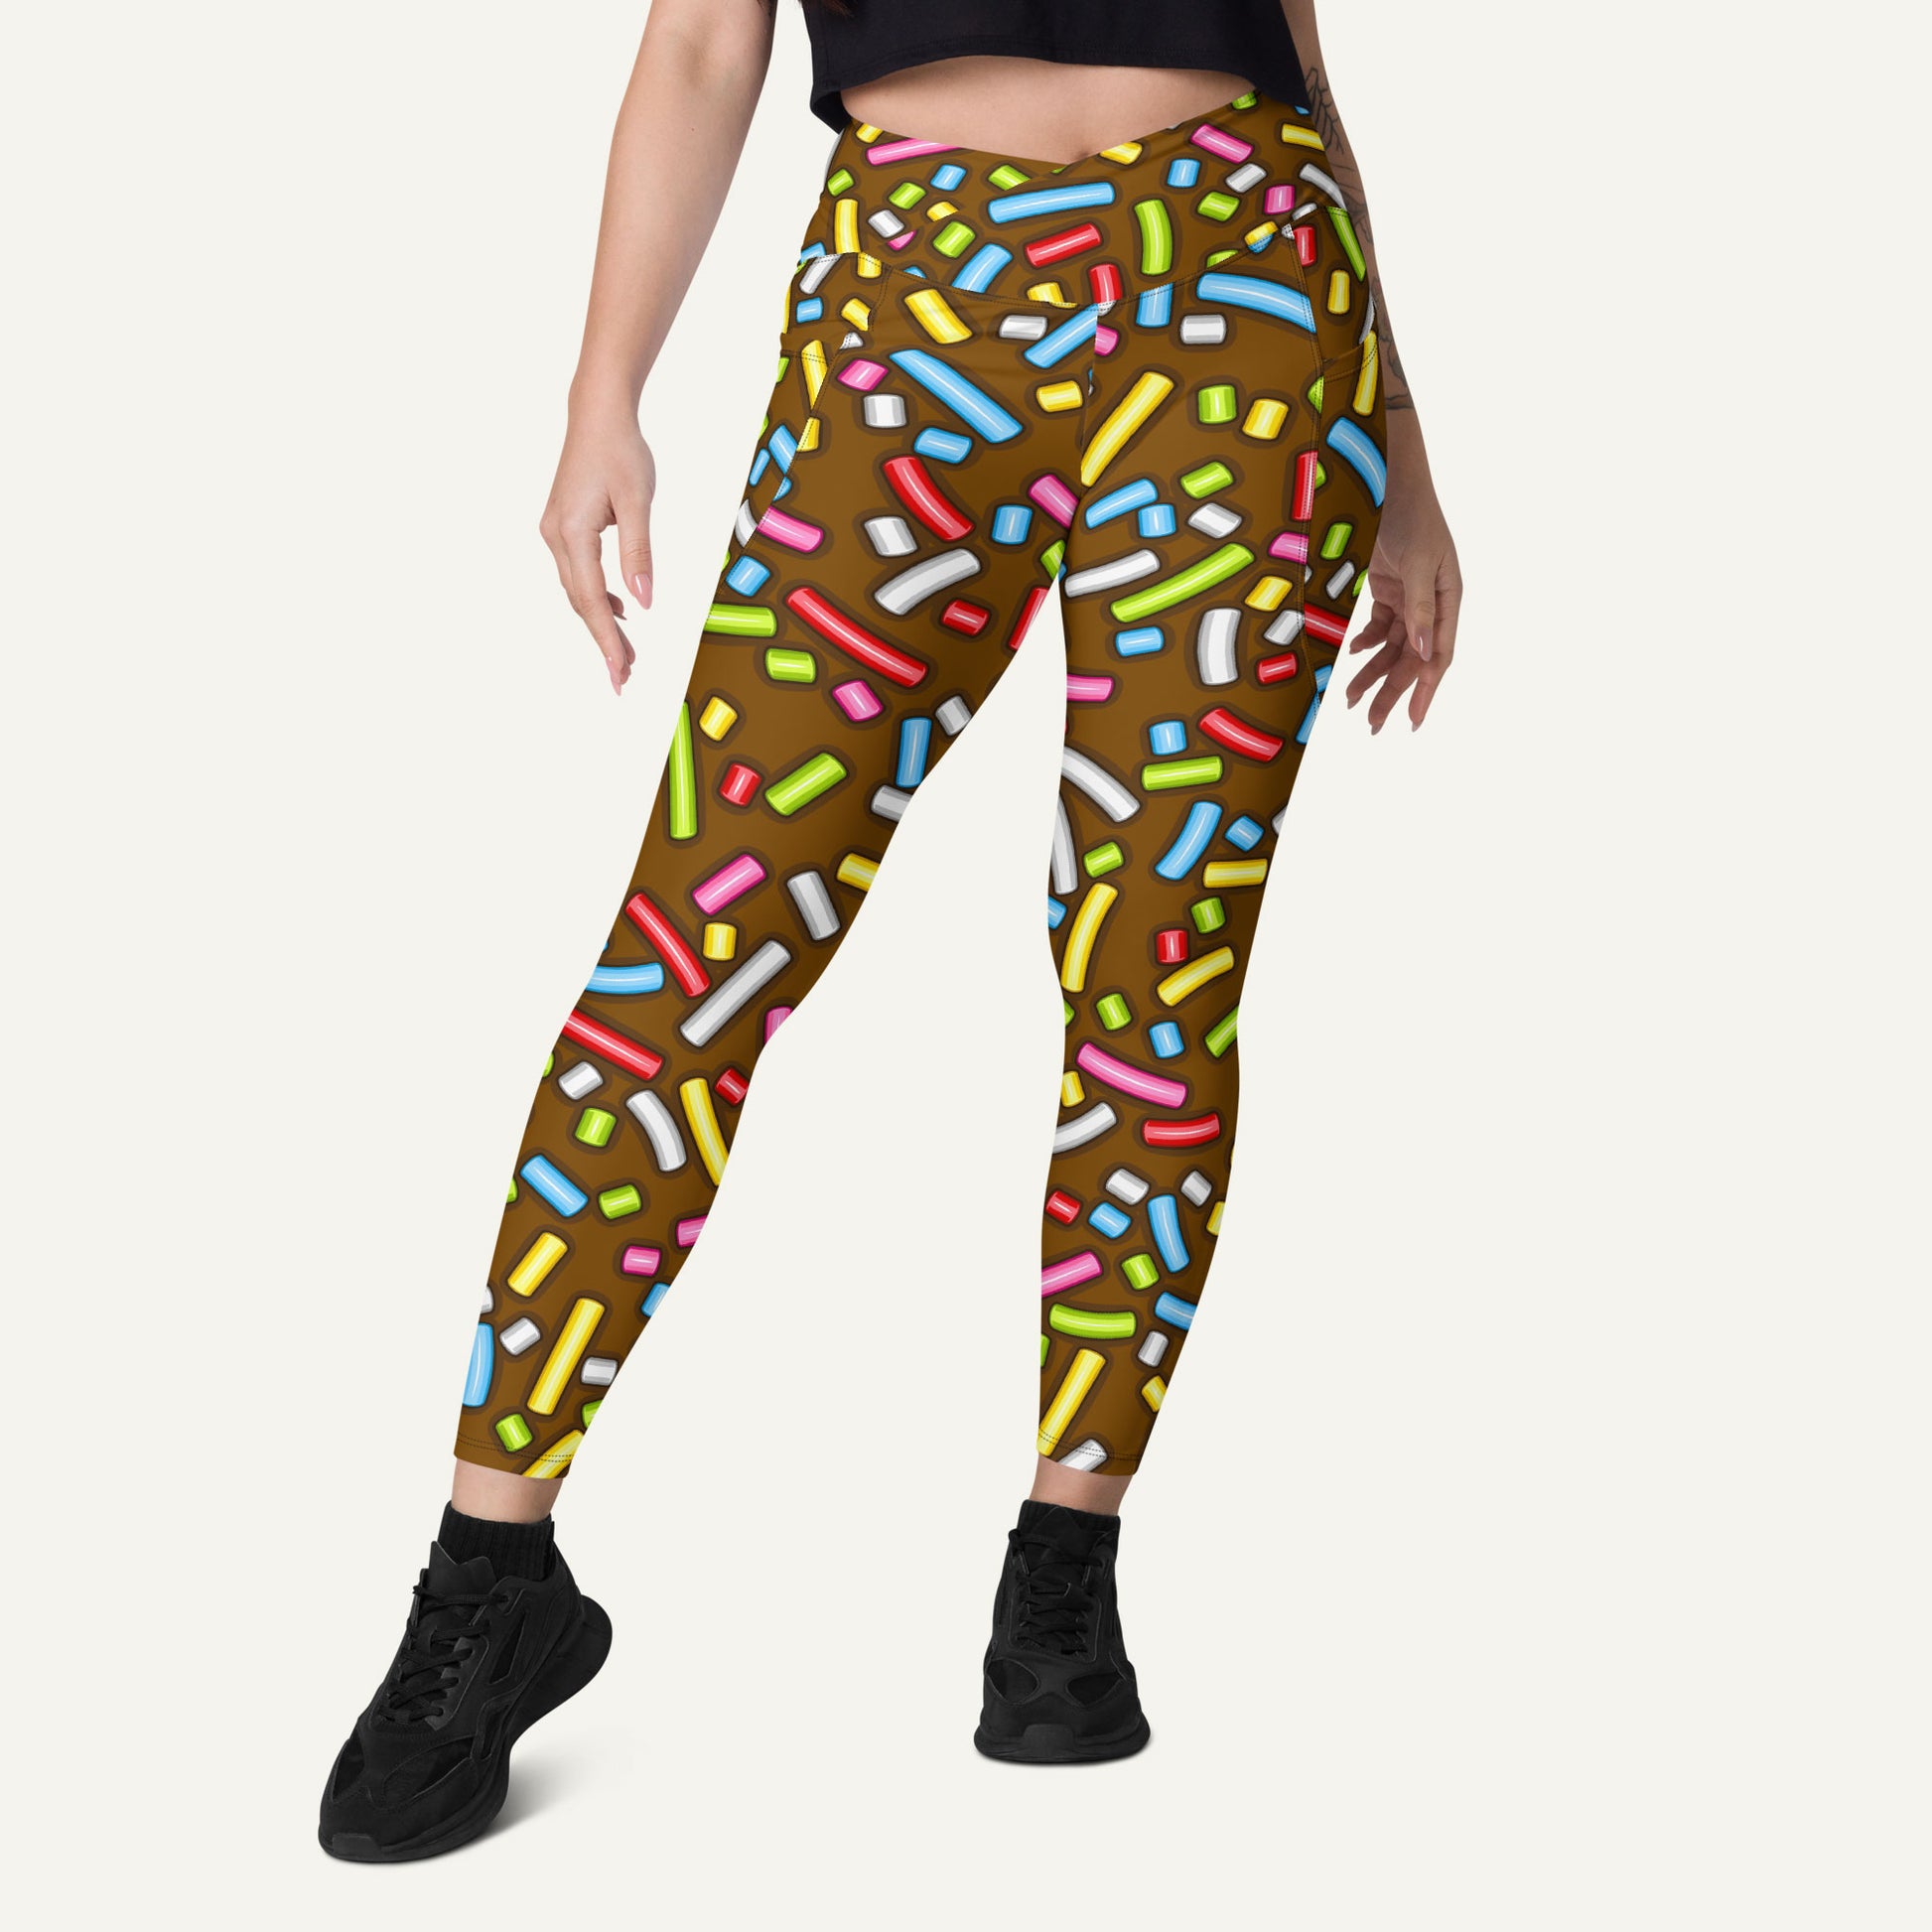 Crossover Leggings with Pockets in White